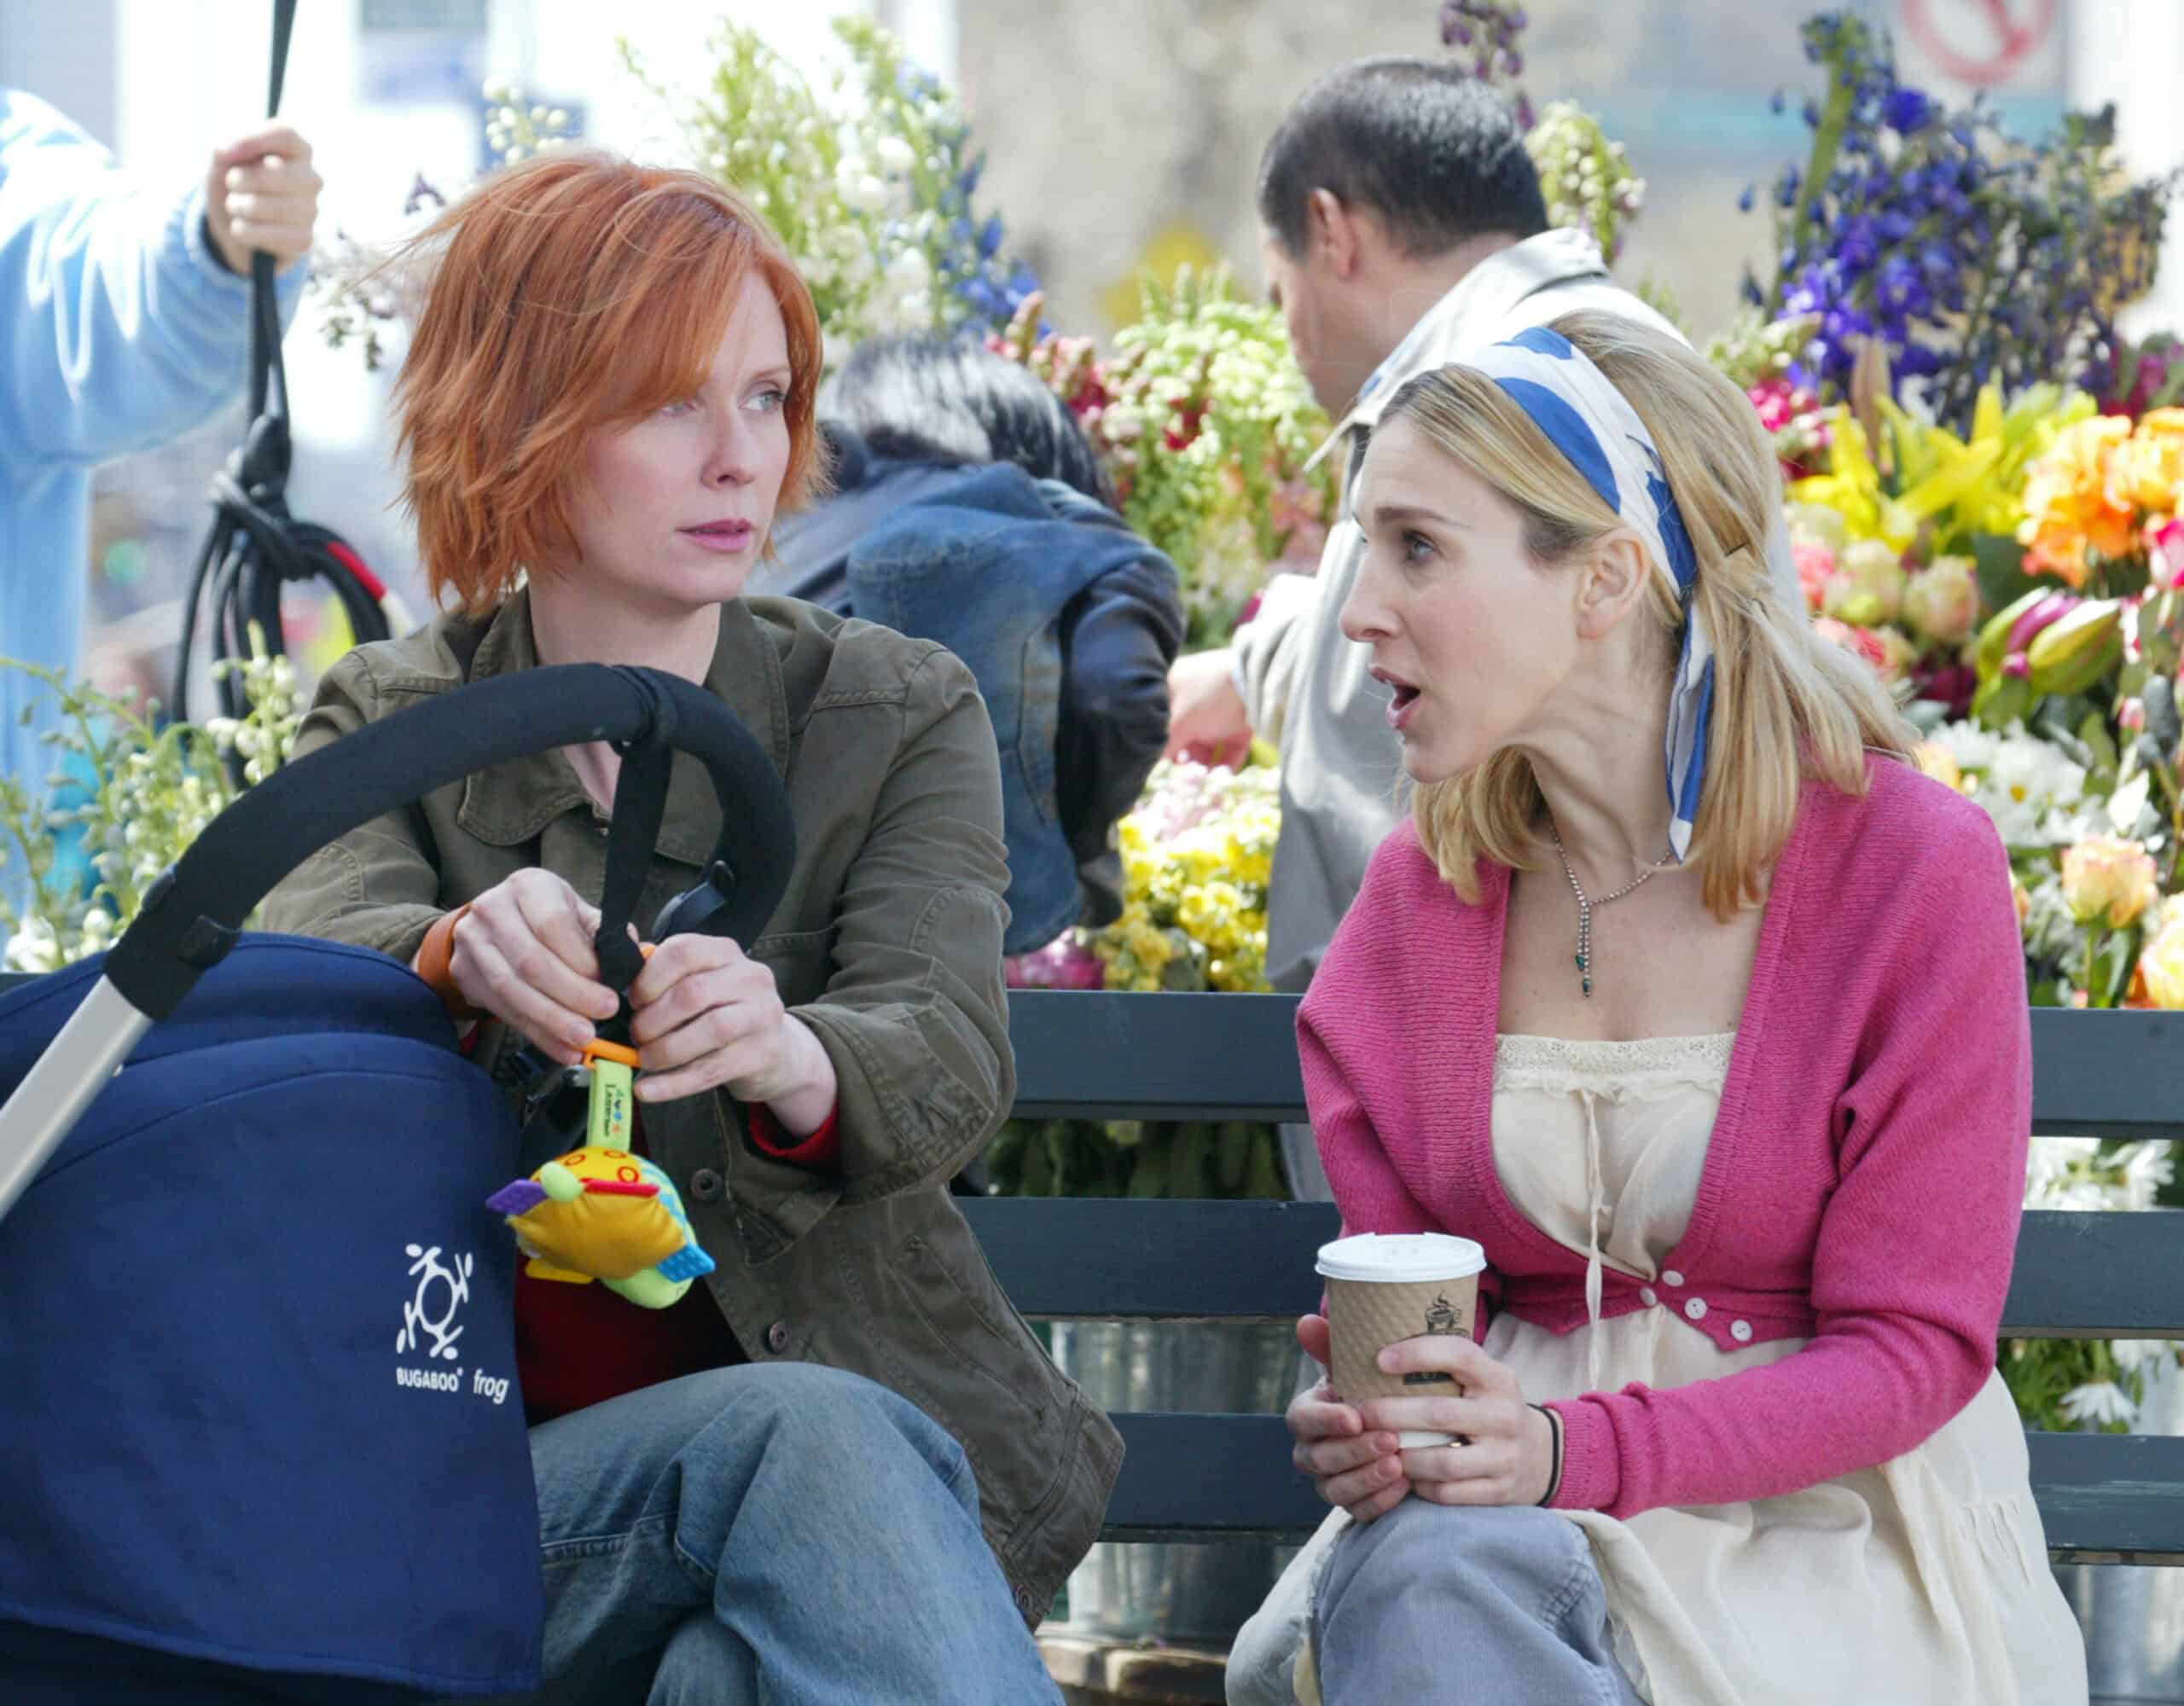 Sarah Jessica Parker And Cynthia Nixon On The Set Of "Sex In The City"